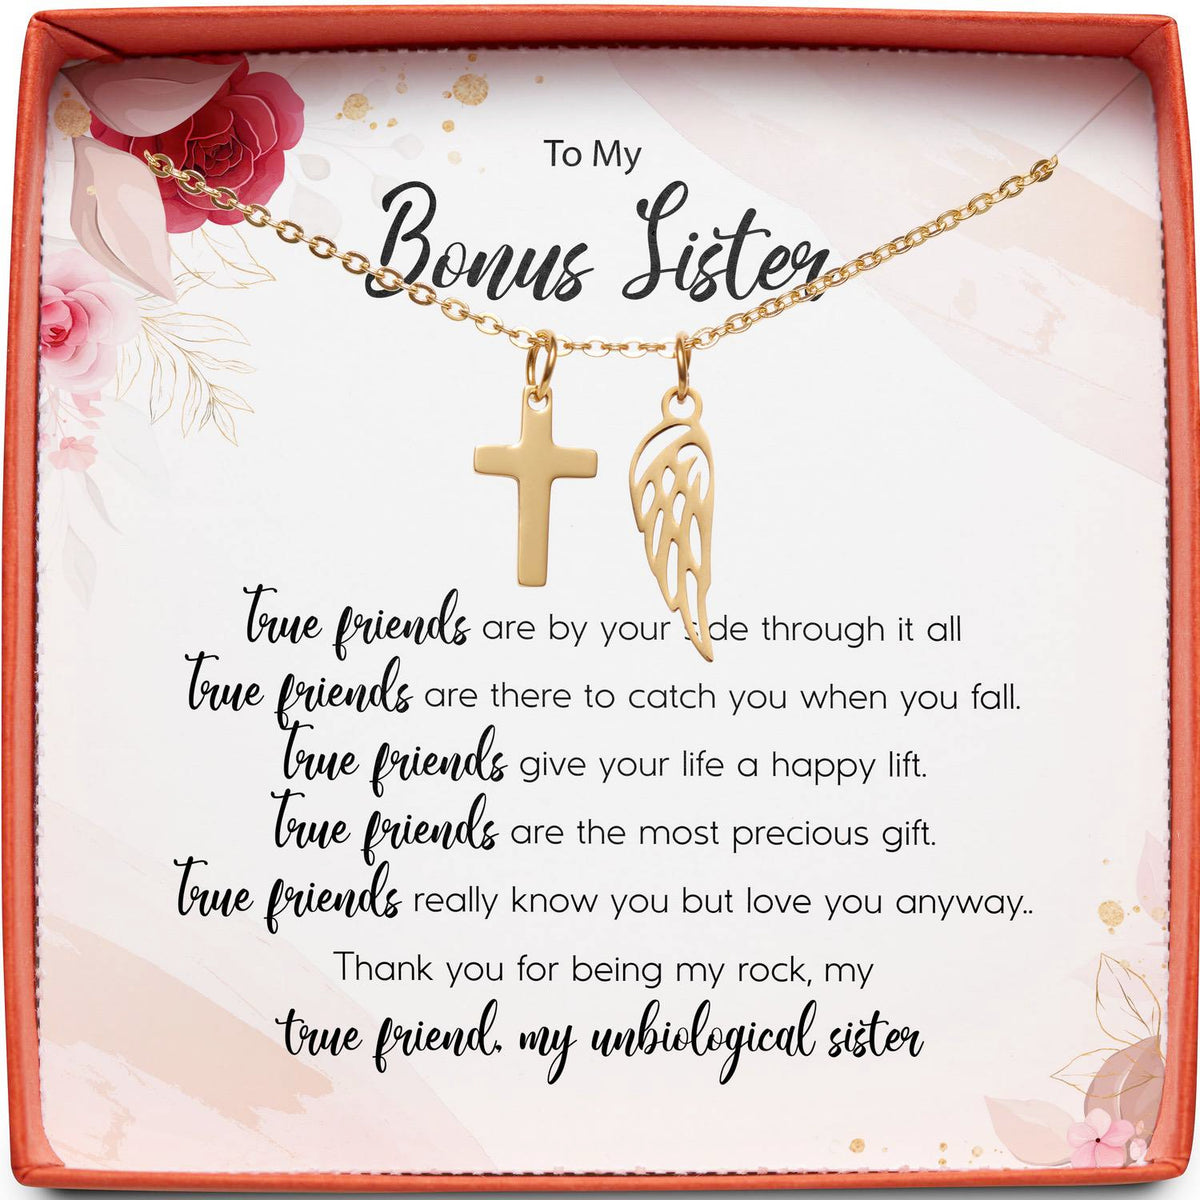 Unbiological Sister: bestie bff necklace – Love & Natural